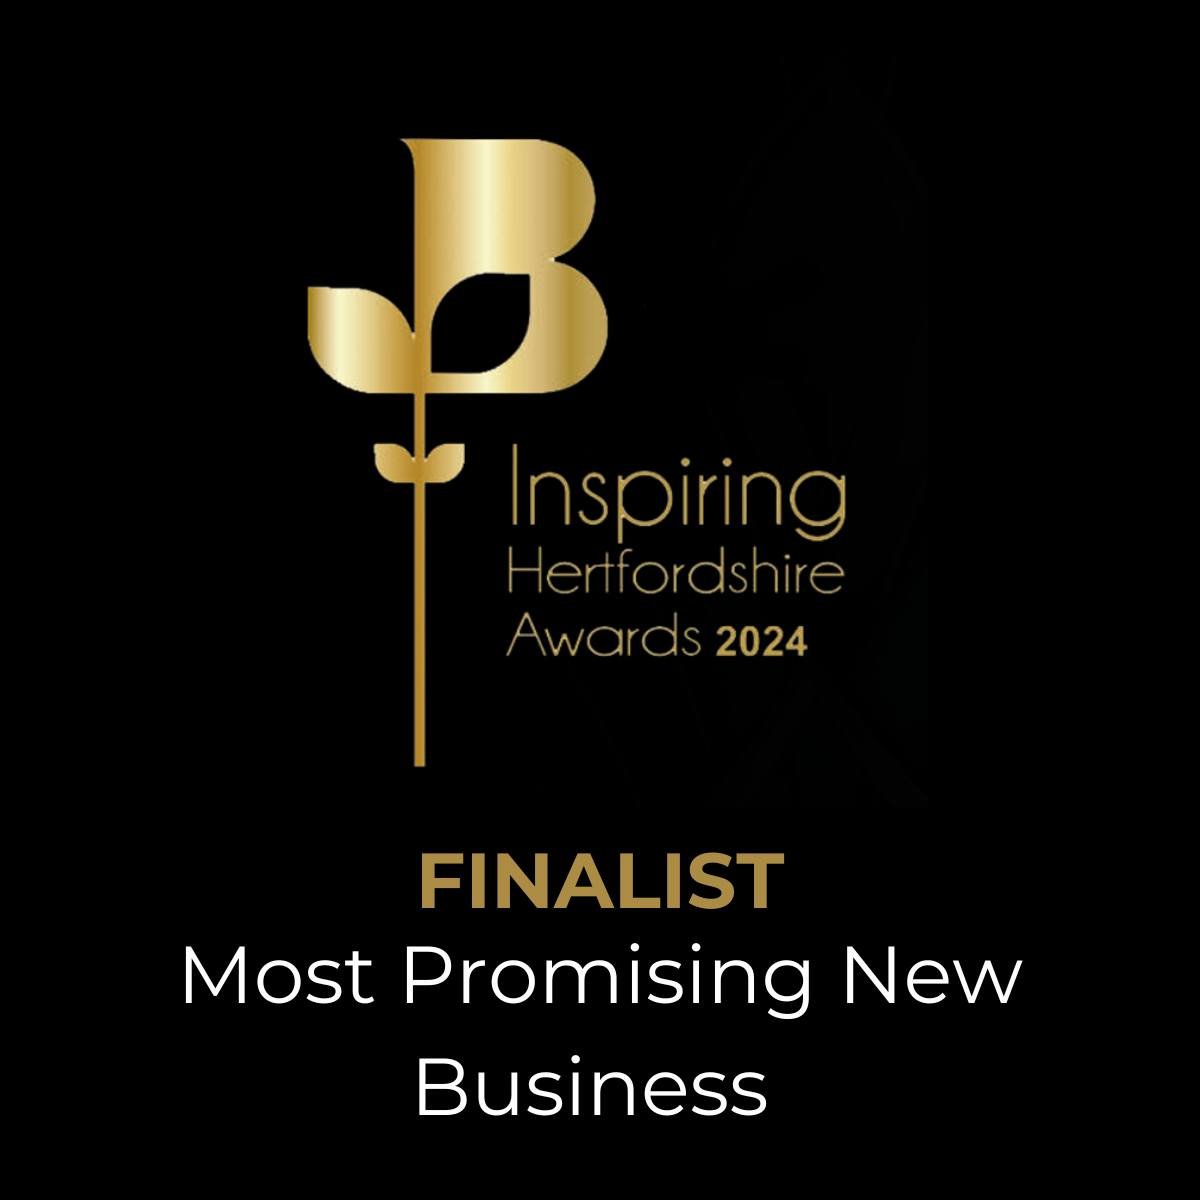 🎉Hurrah! We are FINALISTS in the @herts_chamber Inspiring Herts Awards in the Most Promising New Business category, sponsored by @minerva_computer_services. 

Good luck to fellow finalists Net Zero International, No Floor No More and Saturate Market